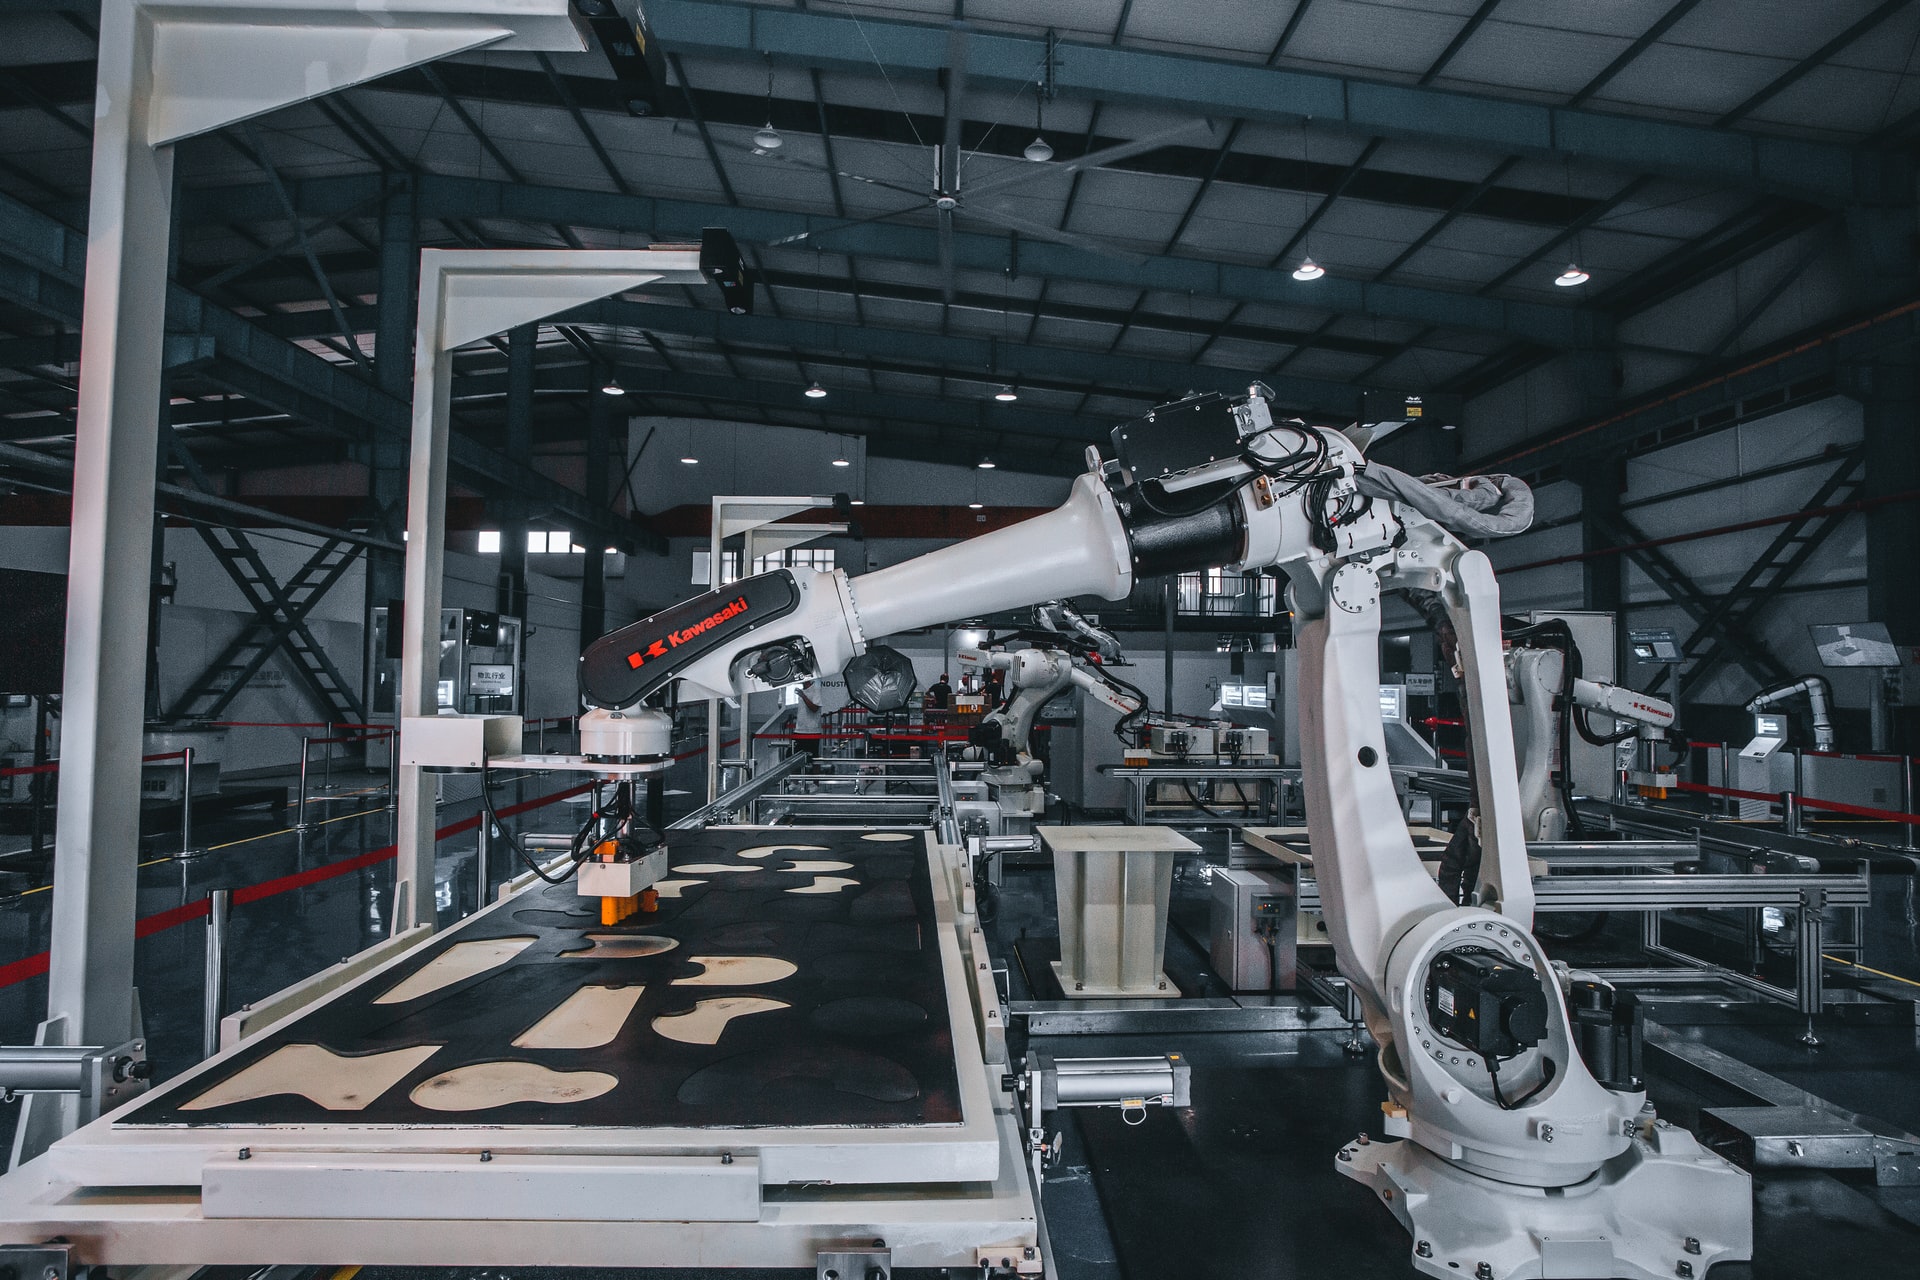 Rising Labor Costs Strengthen the Case for Adoption of Robotics and Automation Tech